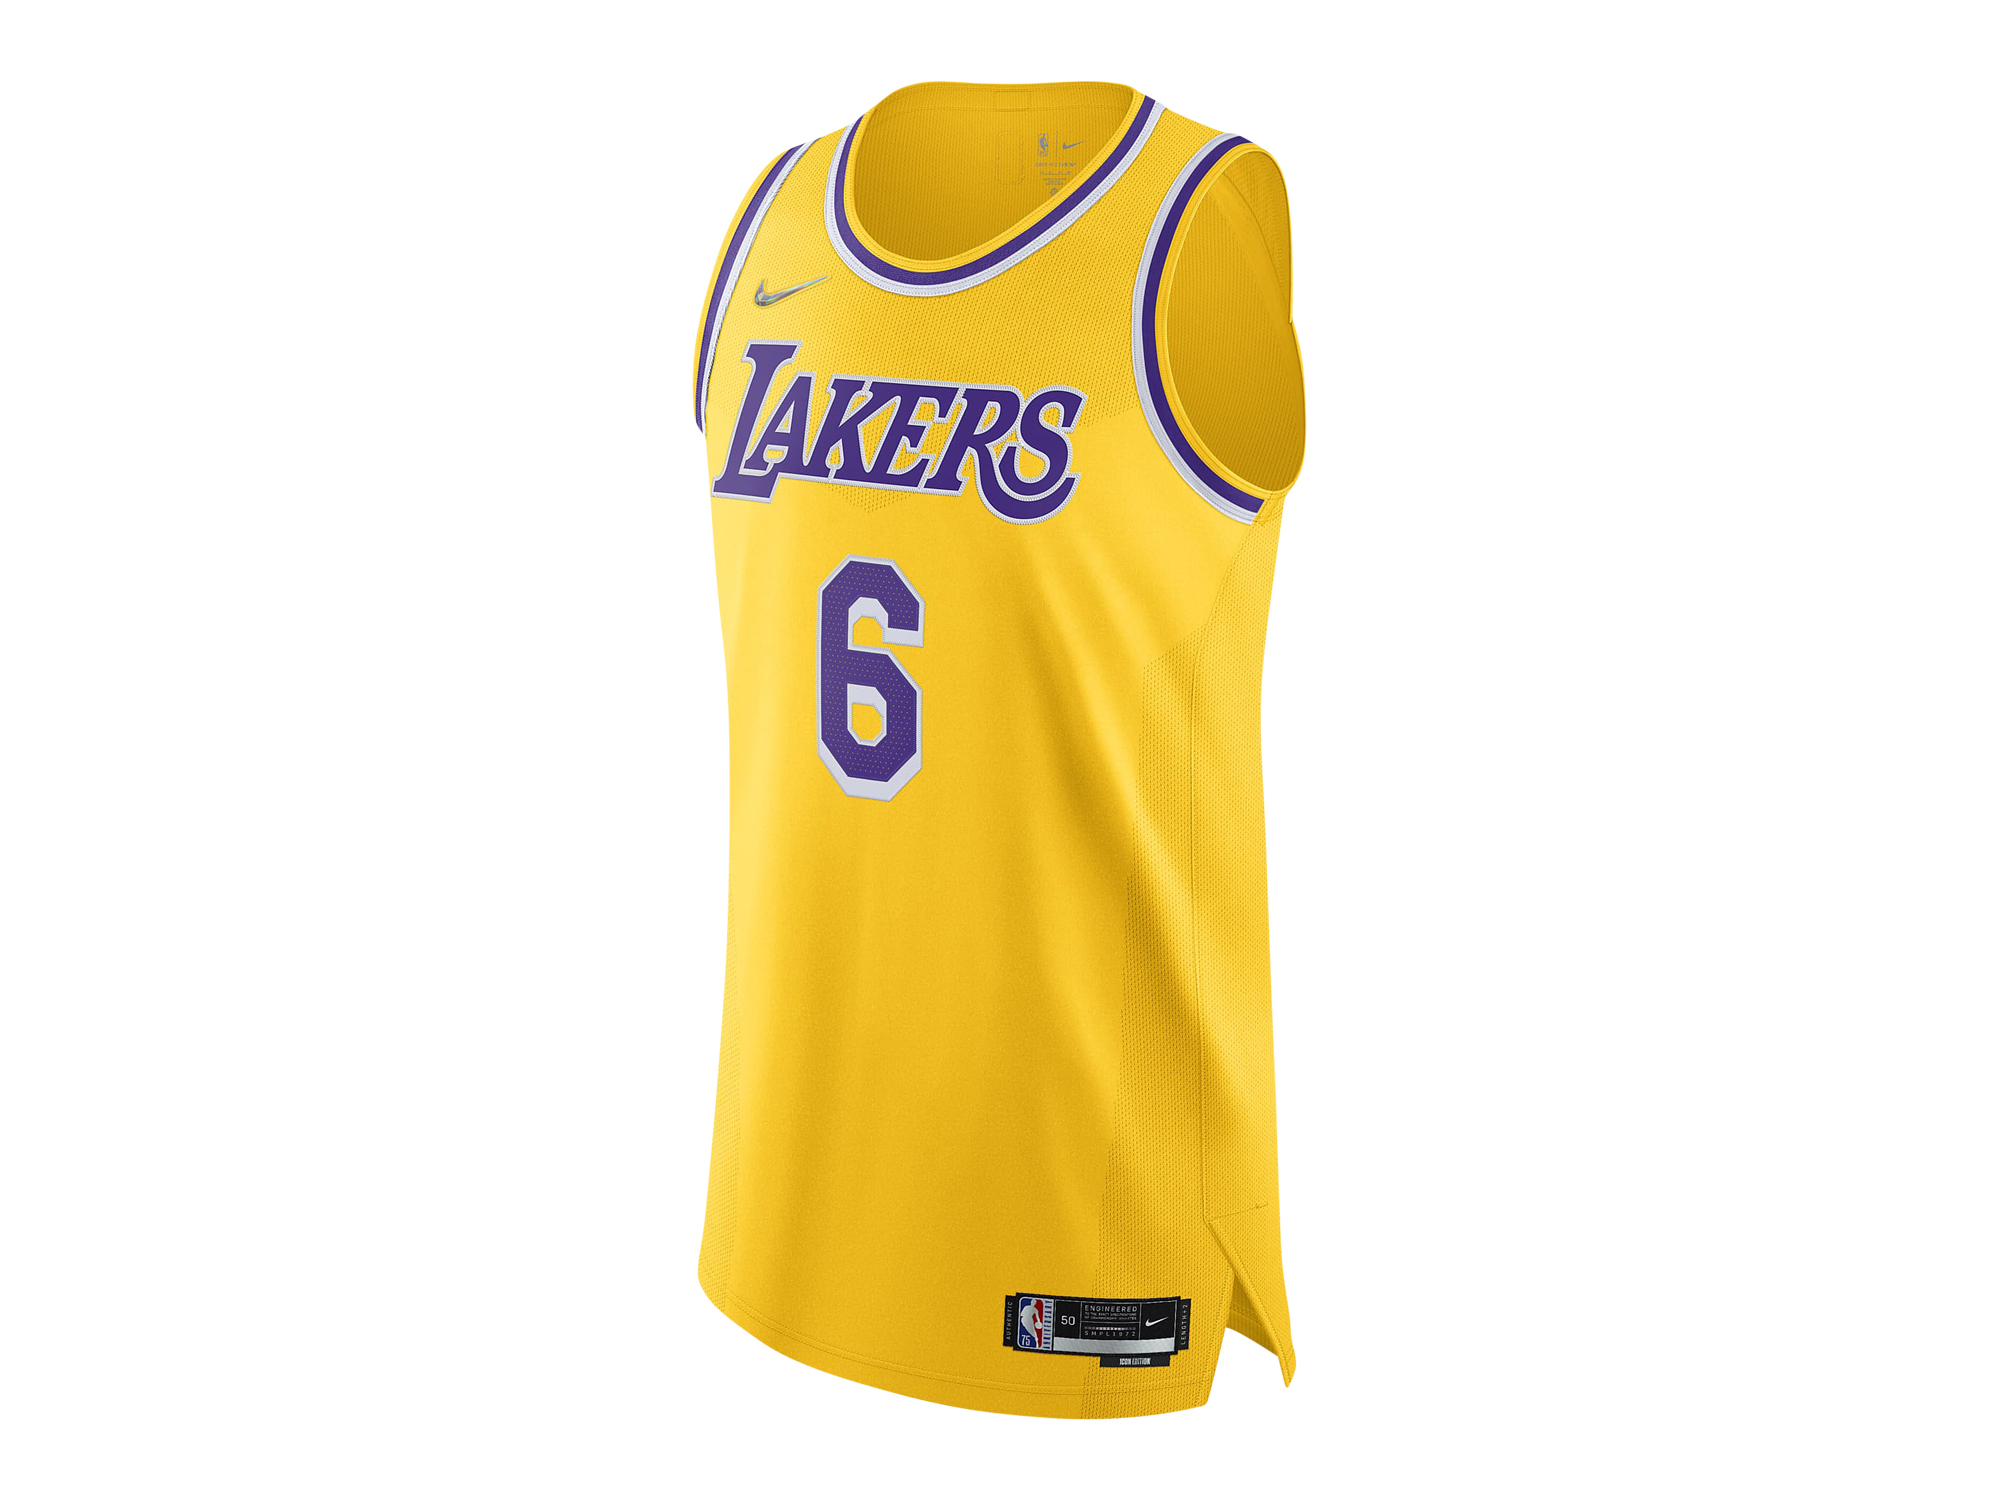 Nike Lebron James Icon Edition Authentic Jersey 